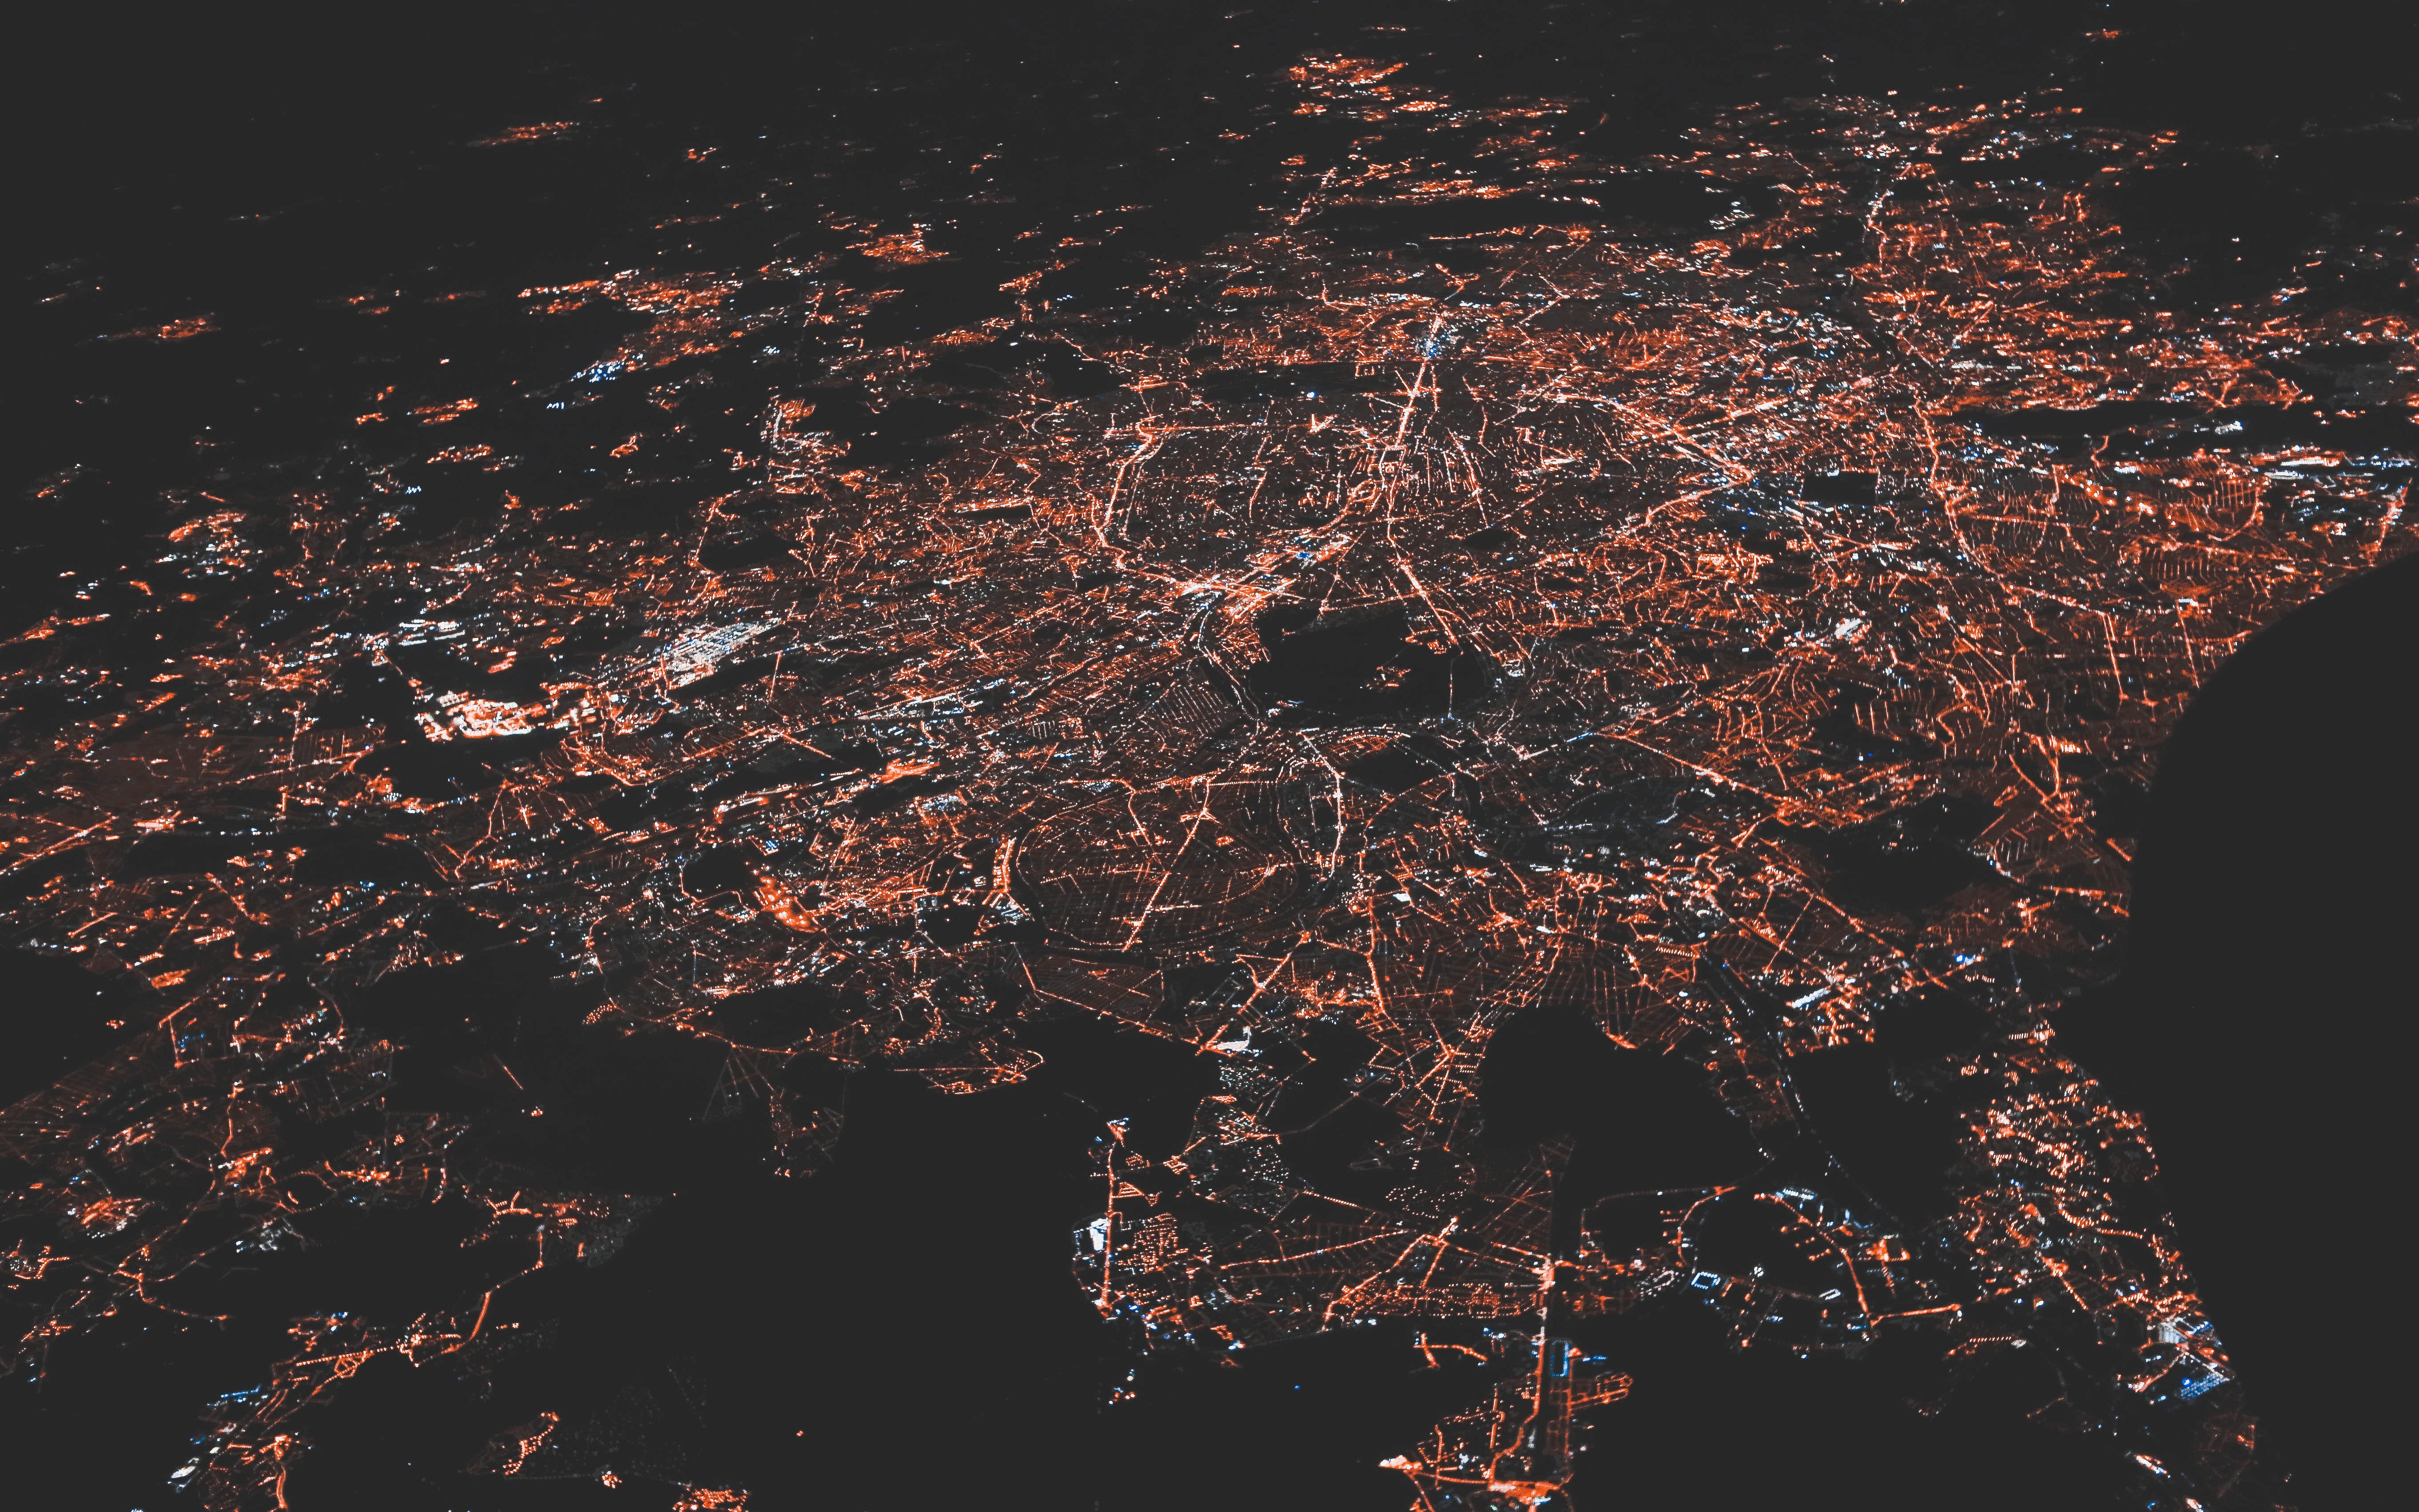 Birds-eye view of a large city at night